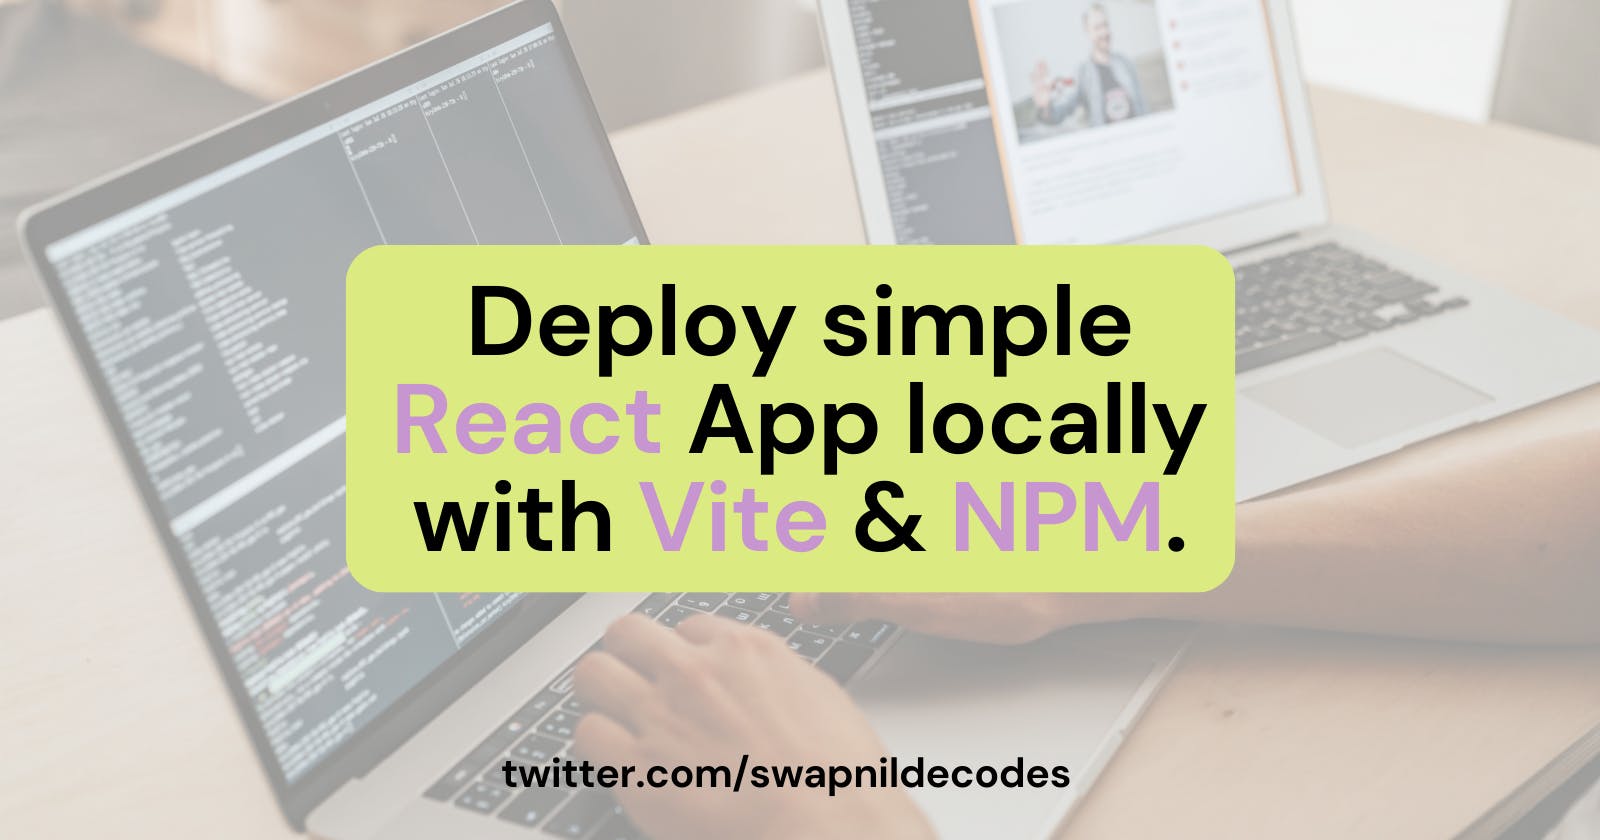 Deploy simple React App locally with Vite & NPM.